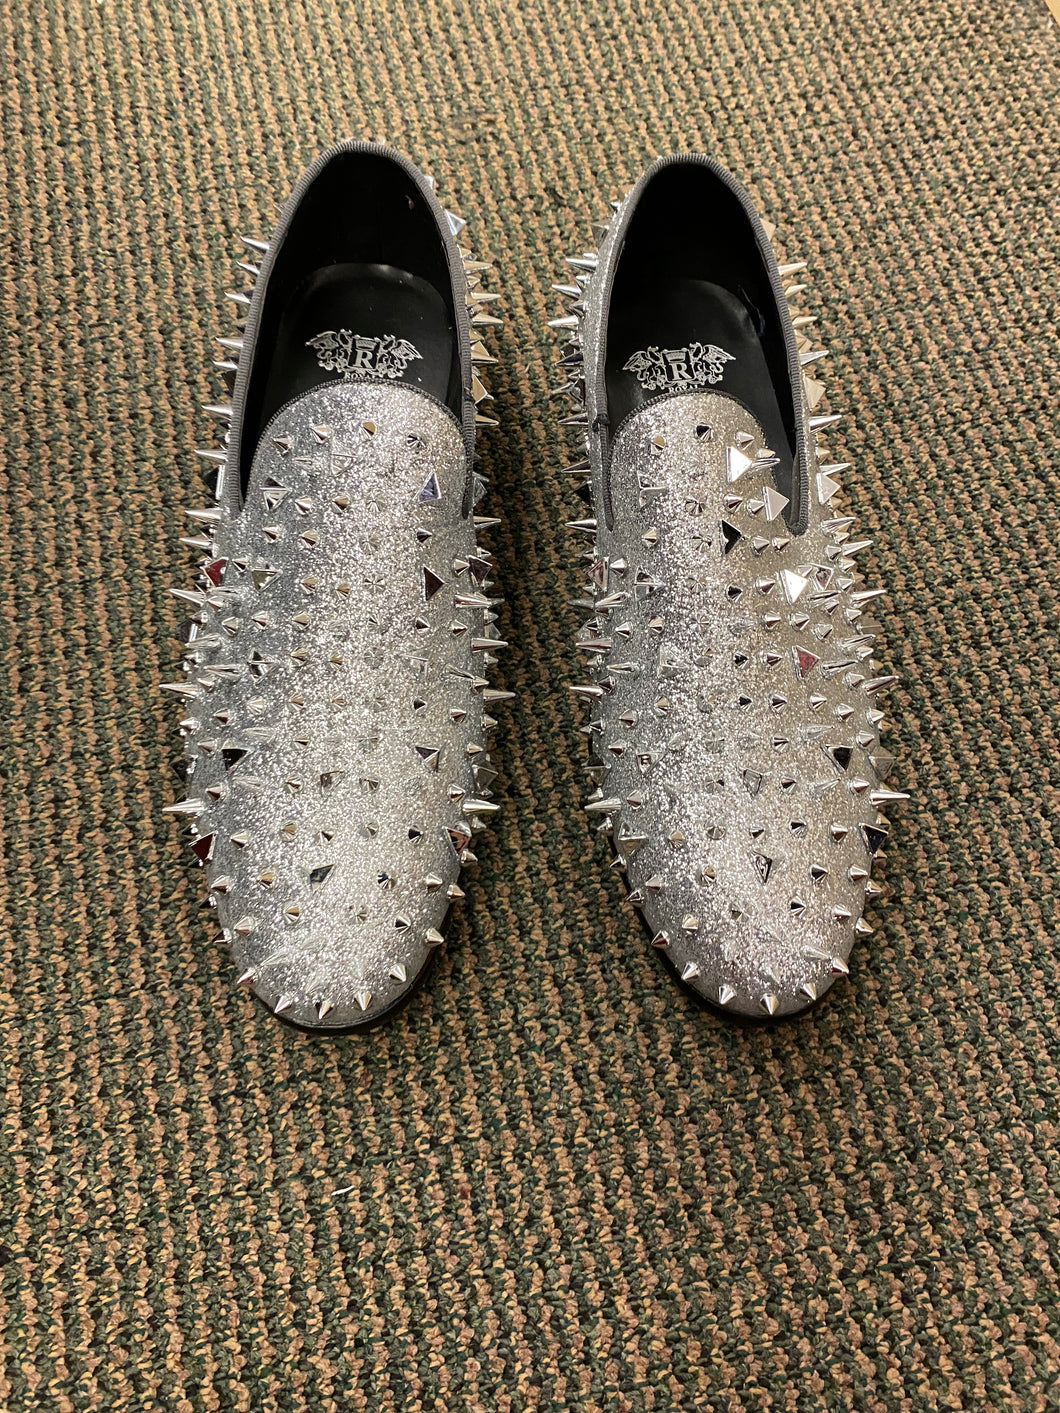 Royal Shoes Silver Spikes Red Bottoms Mens Smoking Slip-on Dress Prom Shoes  8-13